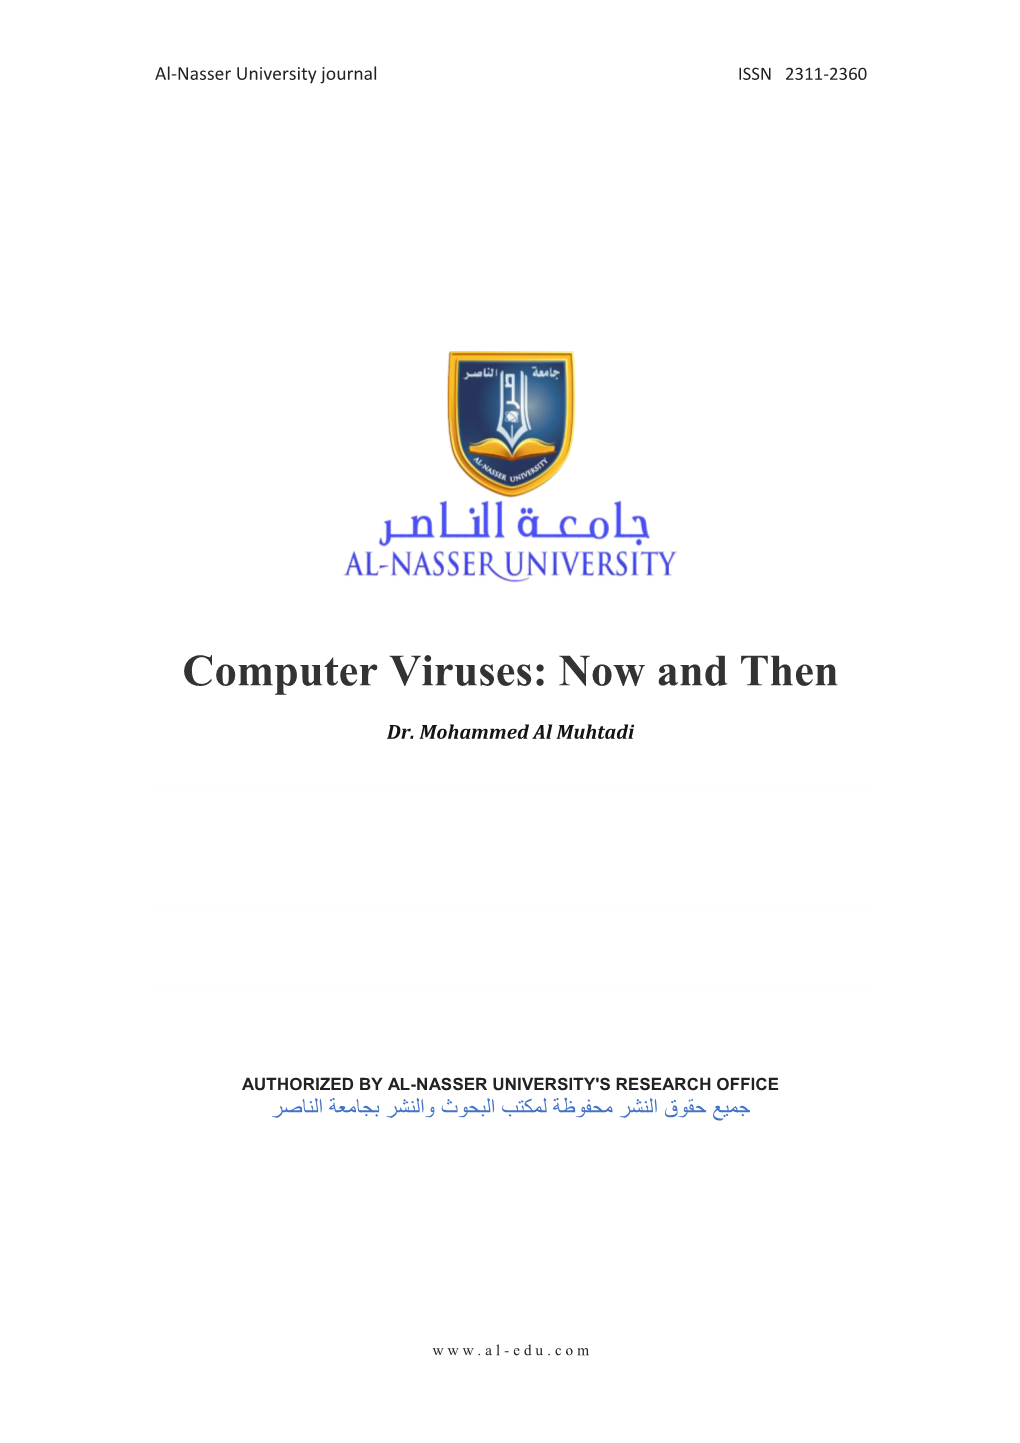 Computer Viruses: Now and Then